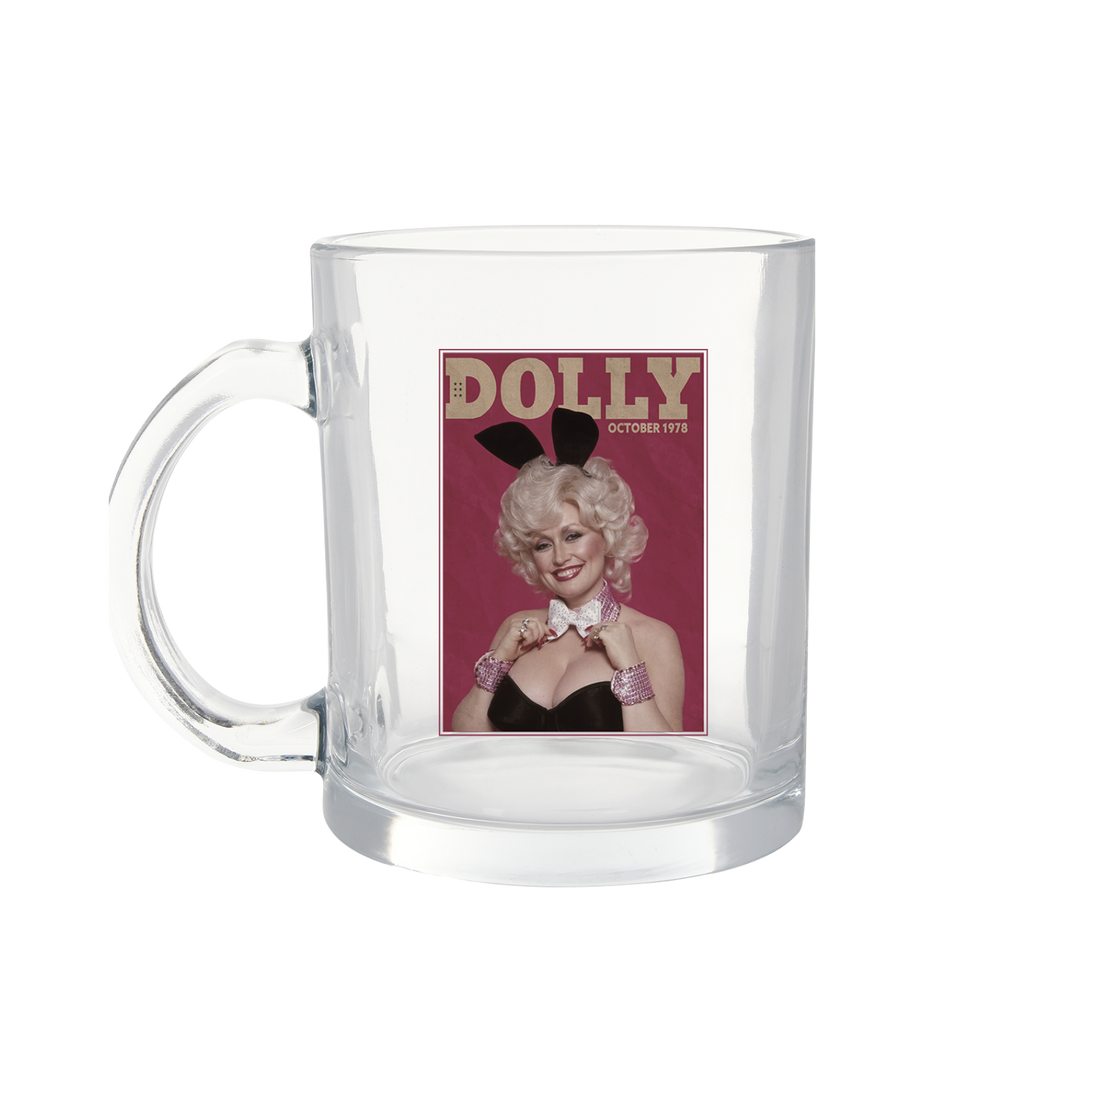 Official Dolly Parton Merchandise. Dolly Parton Bunny 1978 Playboy cover Image clear glass mug with the iconic magazine cover printed on one side.